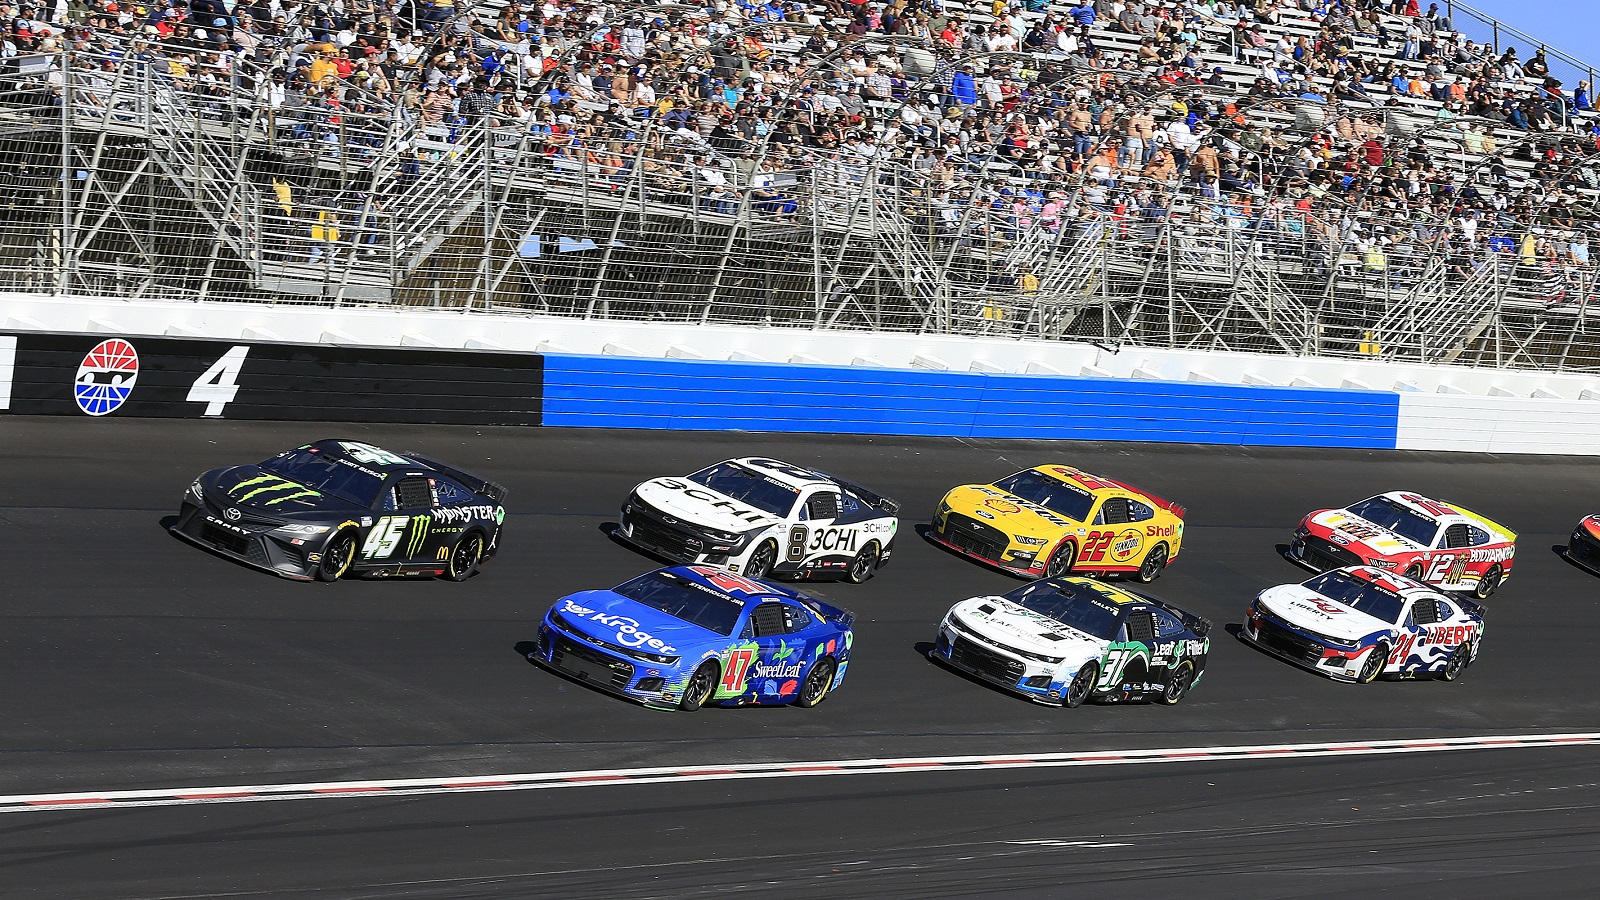 General race action in Turn 4  during the Folds of Honor QuikTrip 500 NASCAR Cup Series race on March 20, 2022 at Atlanta Motor Speedway. | David J. Griffin/Icon Sportswire via Getty Images